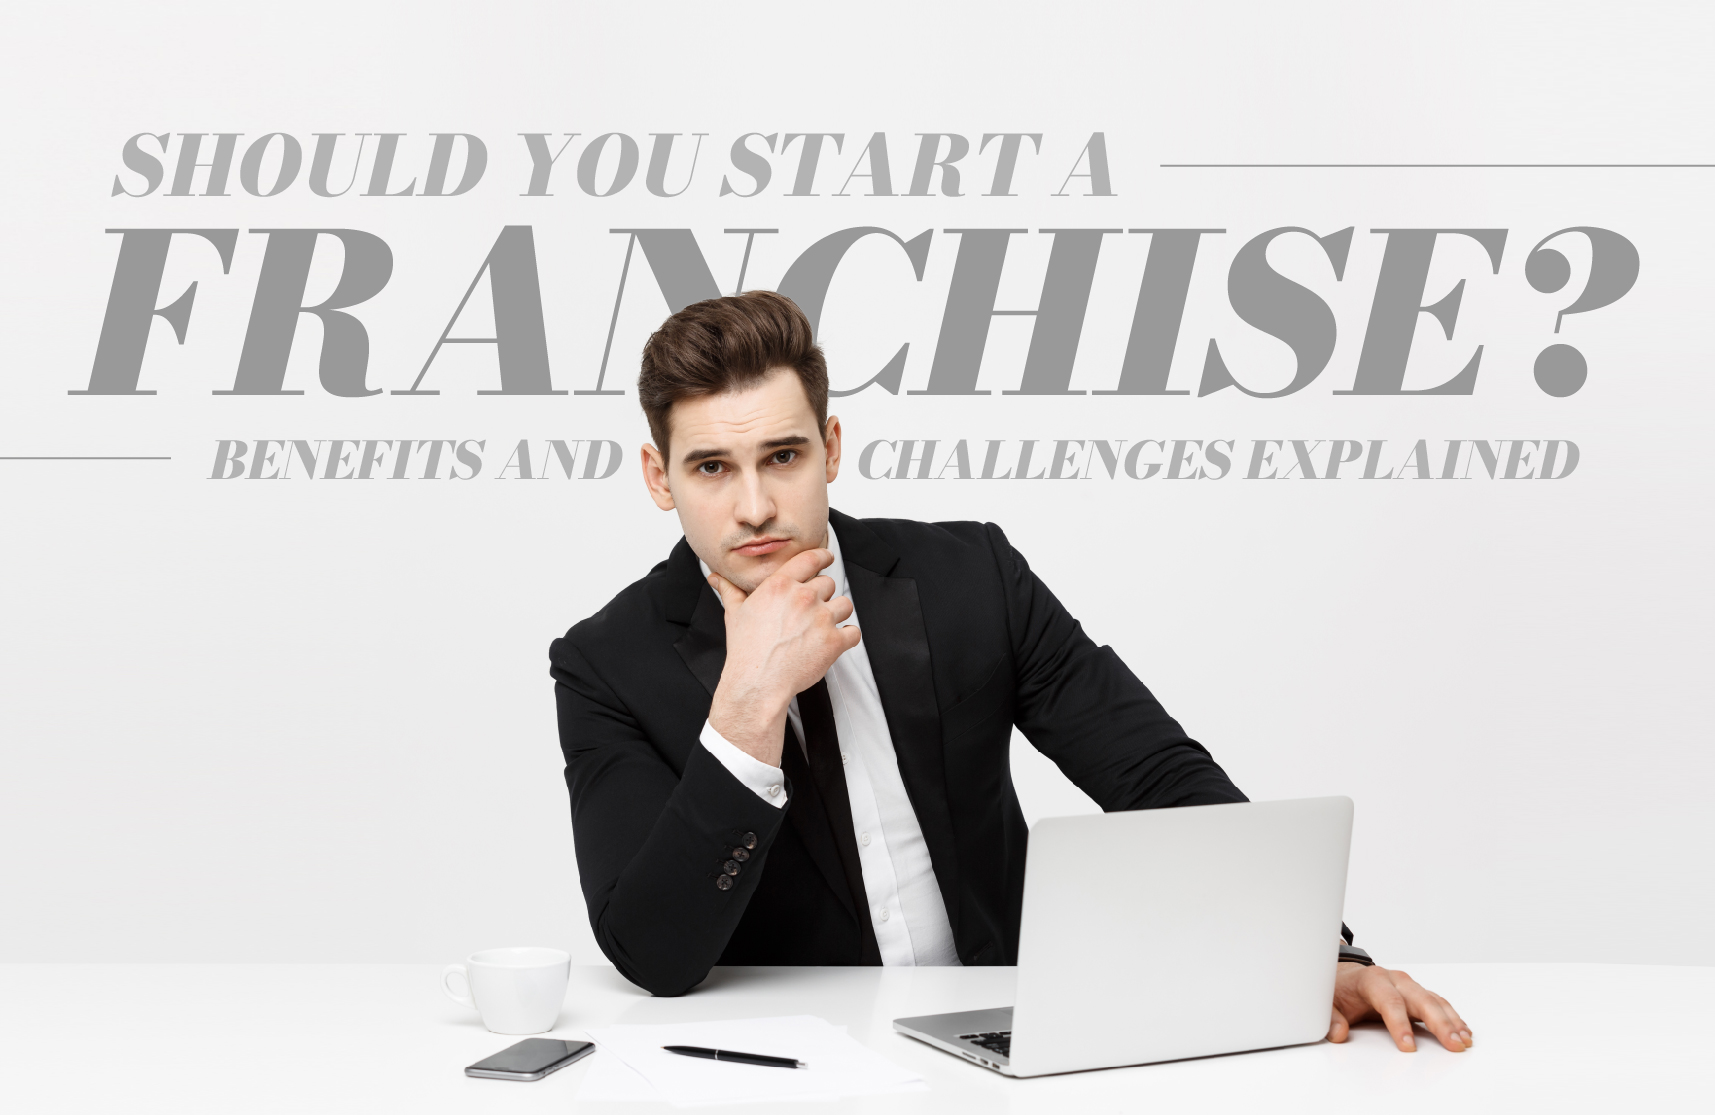 Should You Starting a Franchise? Benefits and Challenges